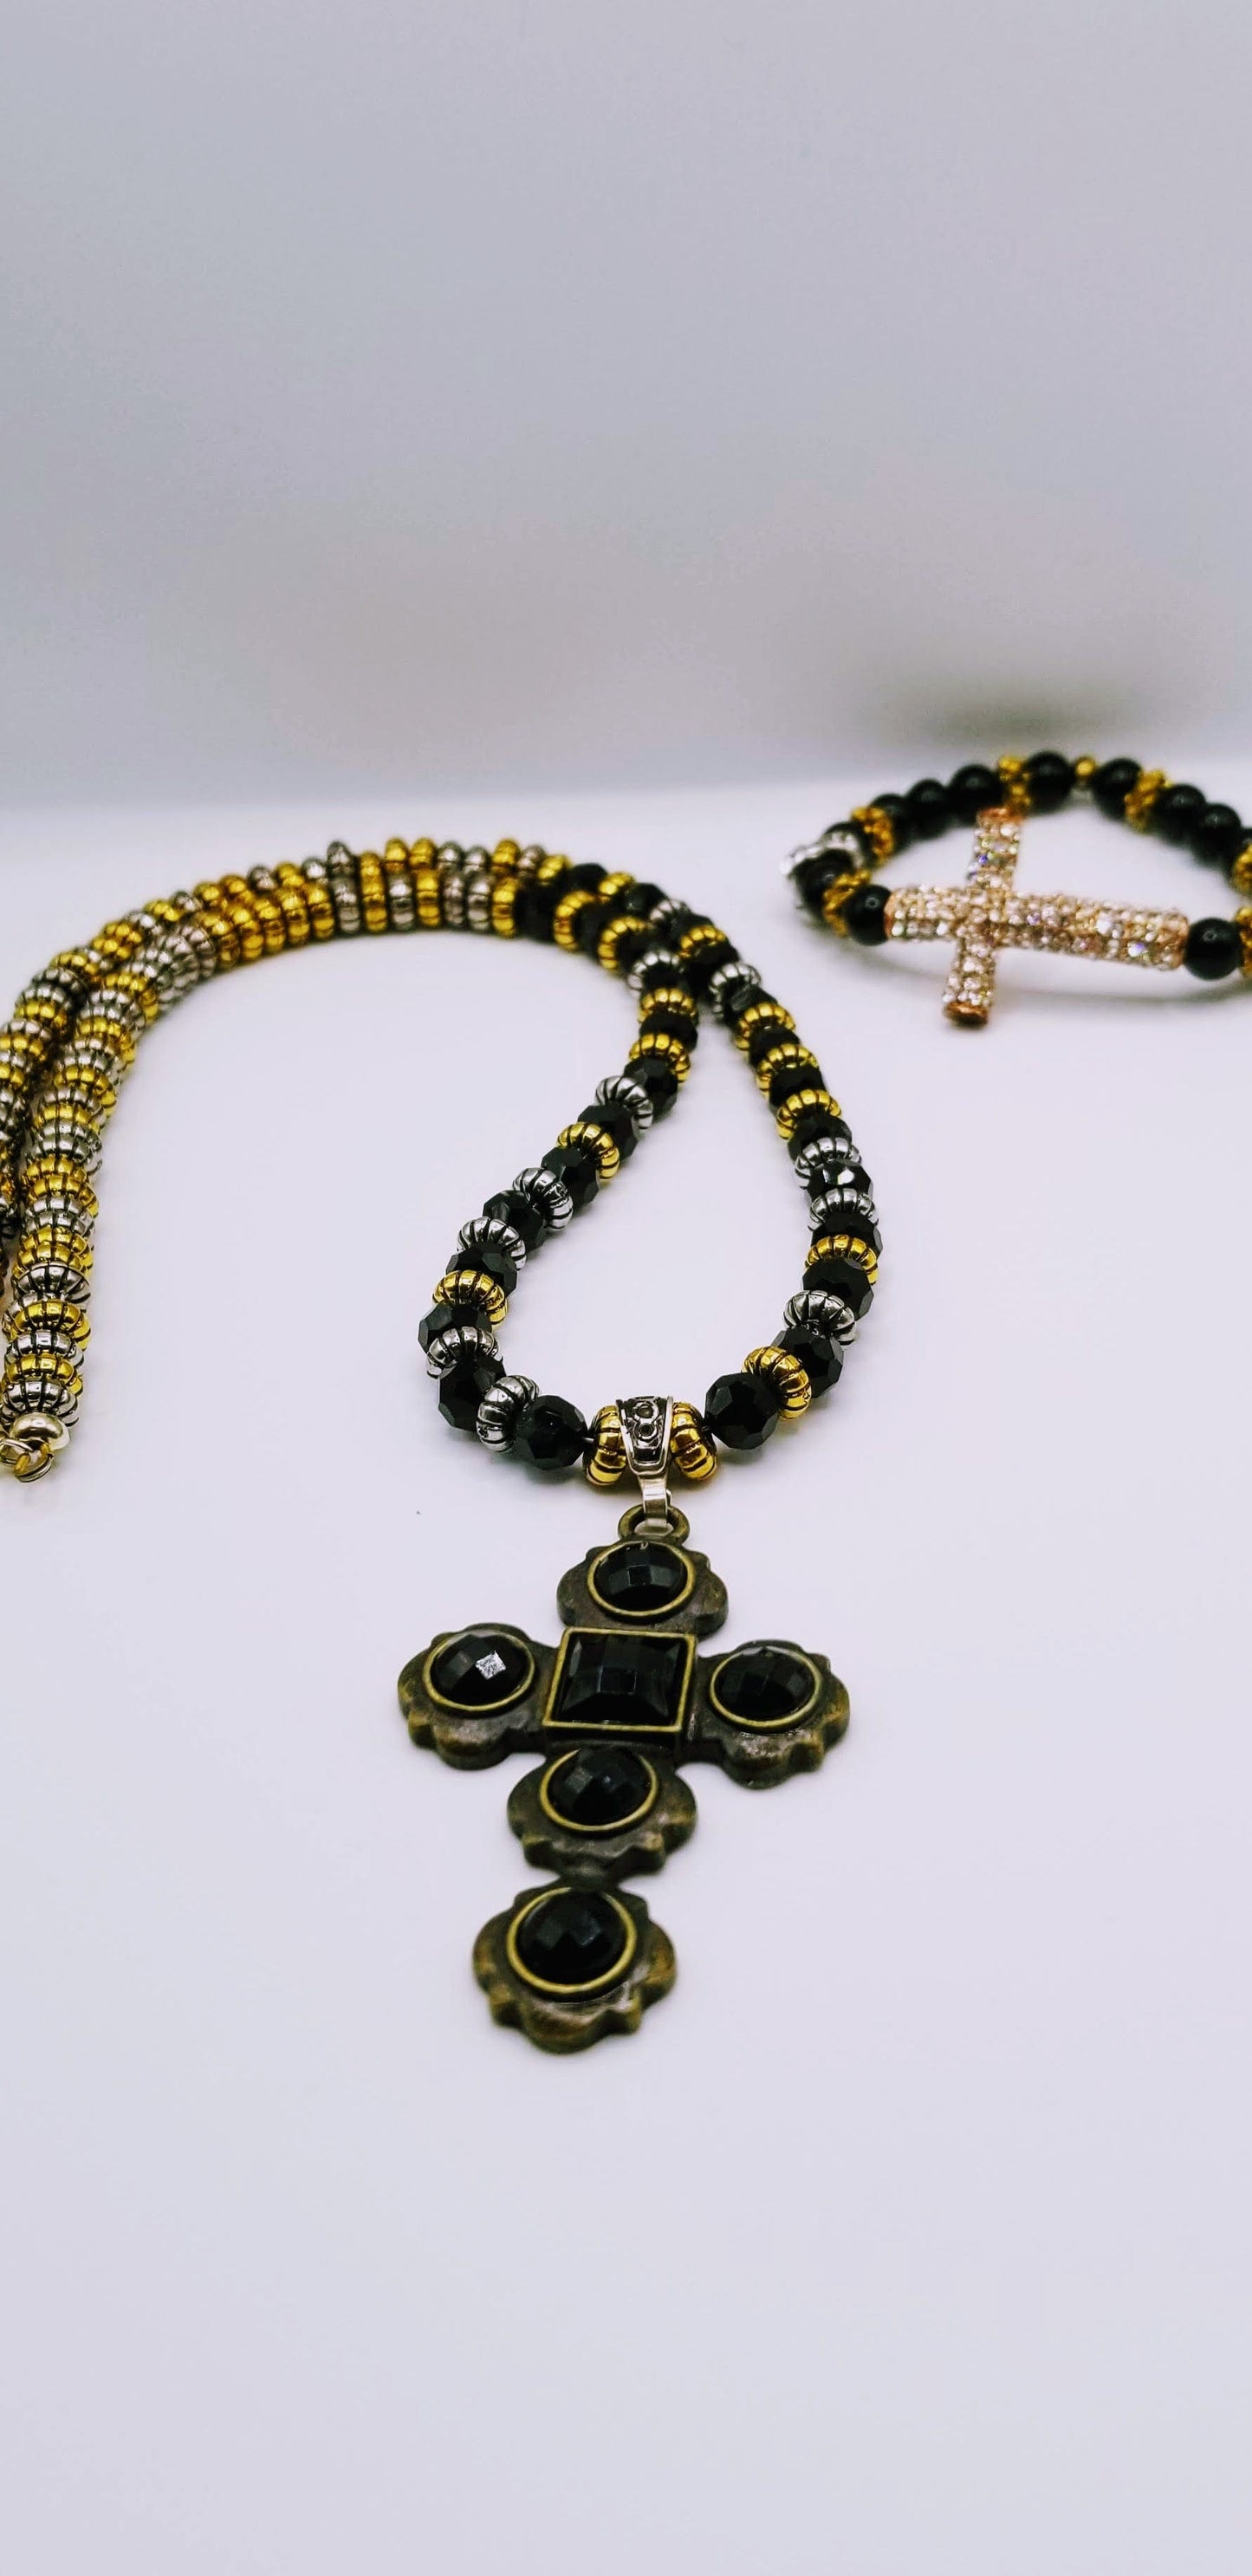 Handcrafted Jewelry By Teri C Necklace set Black Antiquist Cross And Rhinestone Bracelet